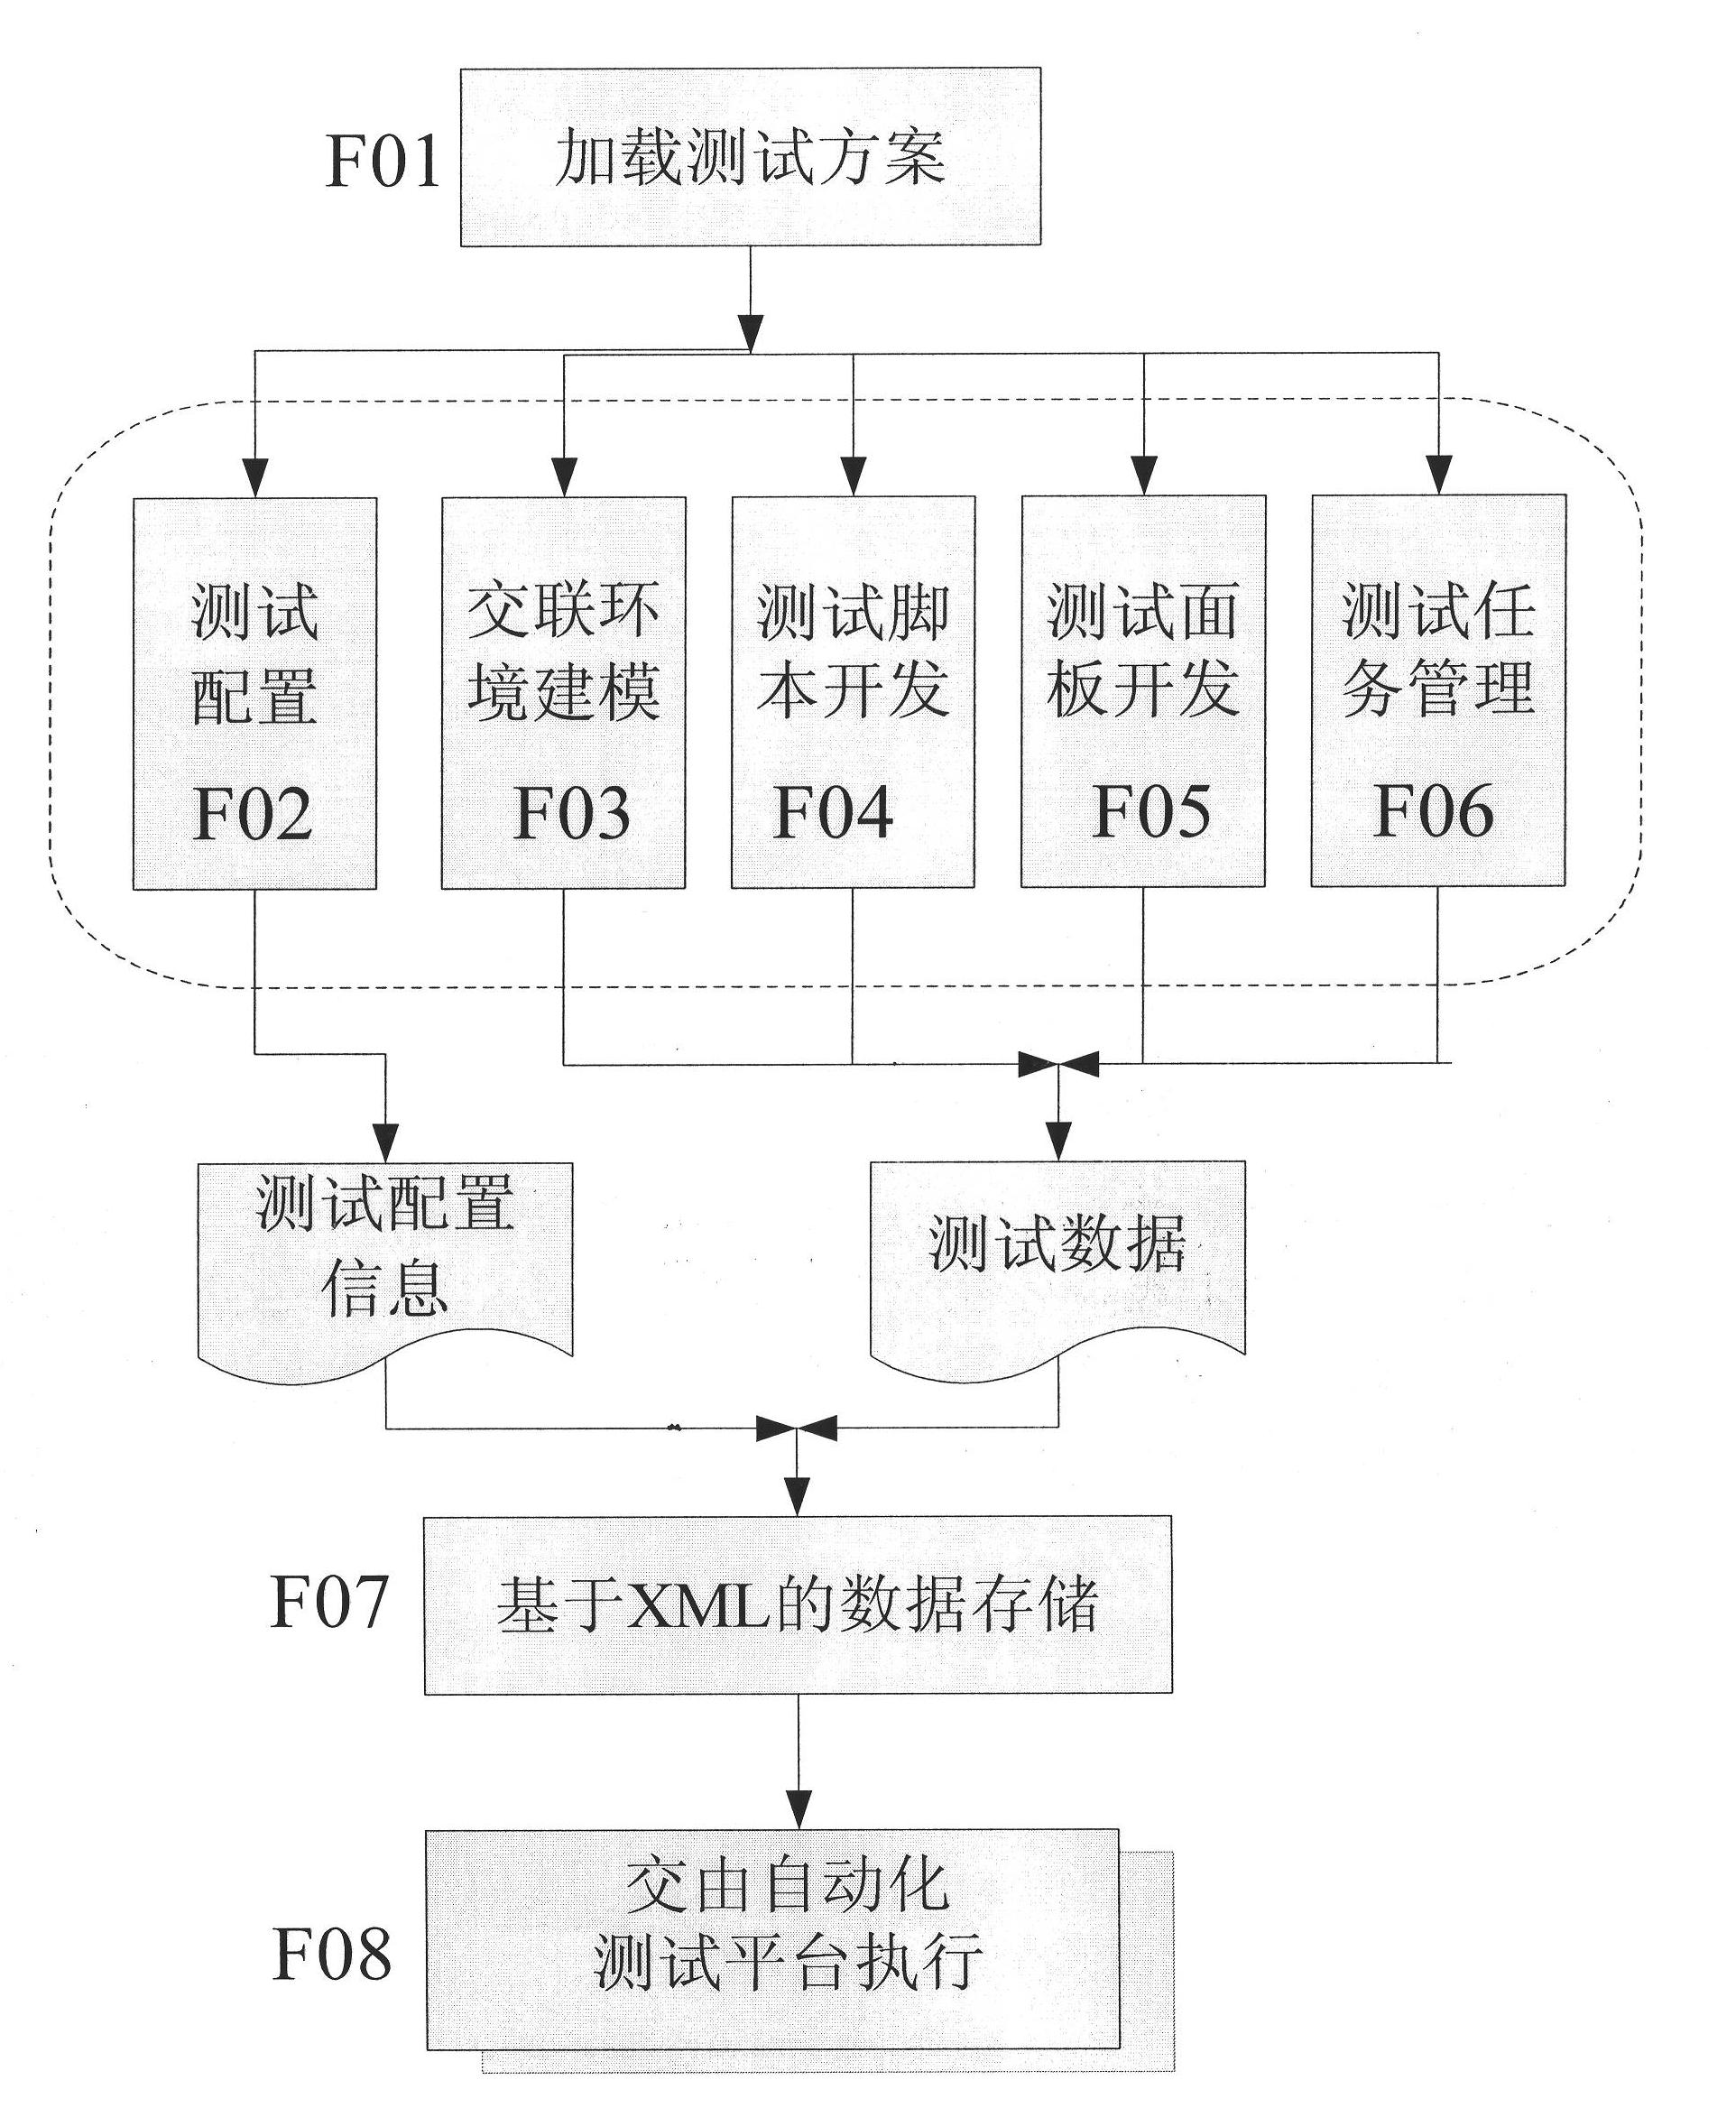 Reusable embedded software testing and developing method and system